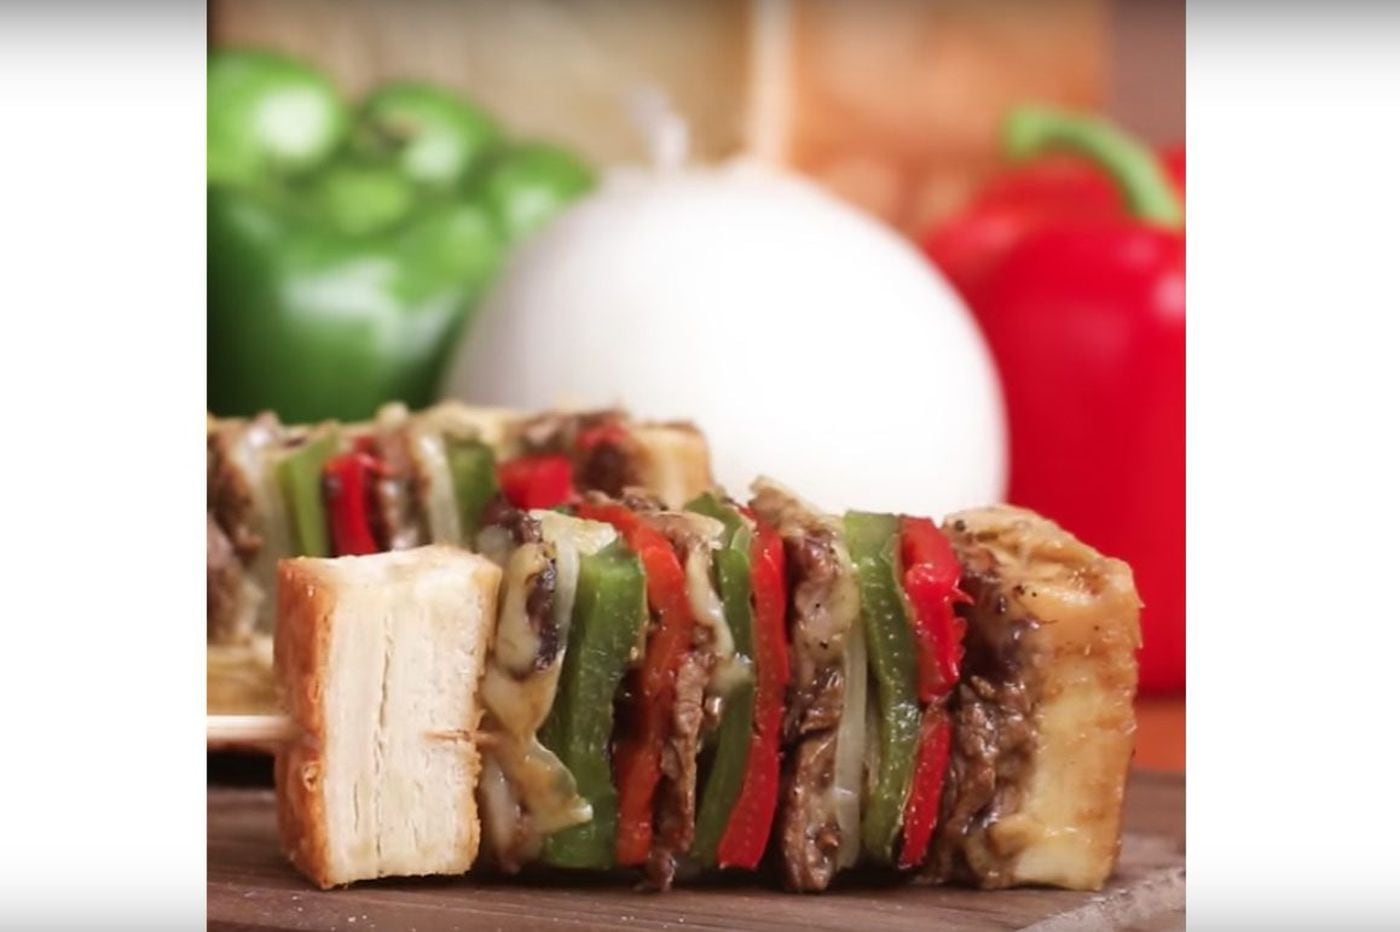 Buzzfeed Apologizes To Philly For Ultimate Cheesesteak Skewers Tasty Video